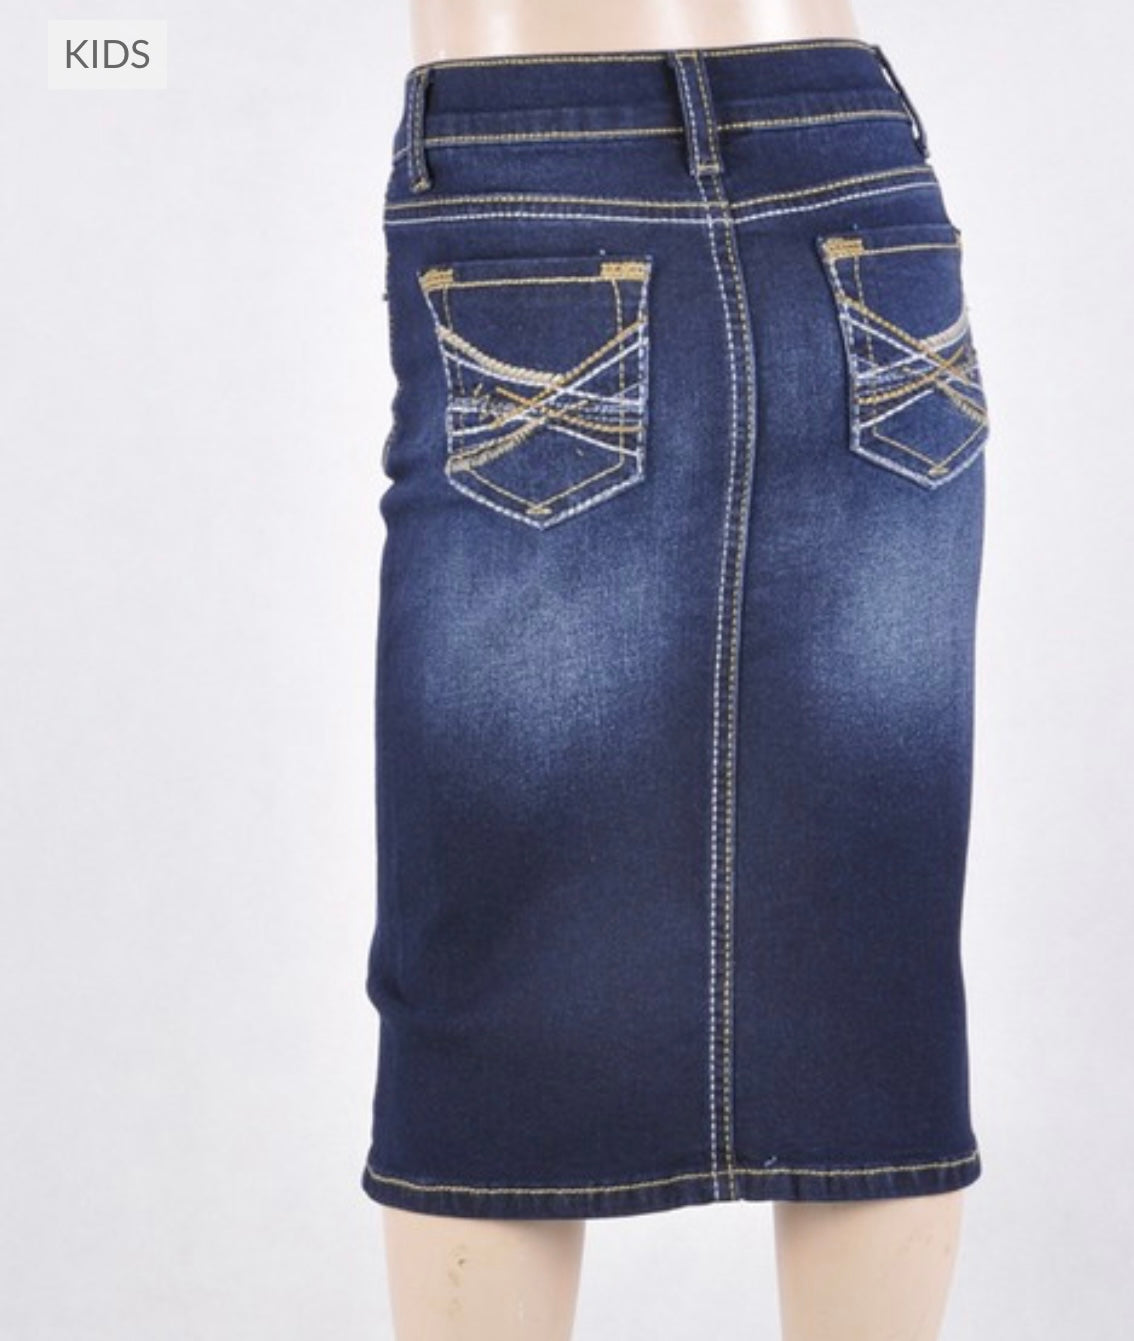 What jeans to wear Spotlight Week! The Denim Pencil Skirt, Something to  Reconsider - Sharon Haver - FocusOnStyle.com